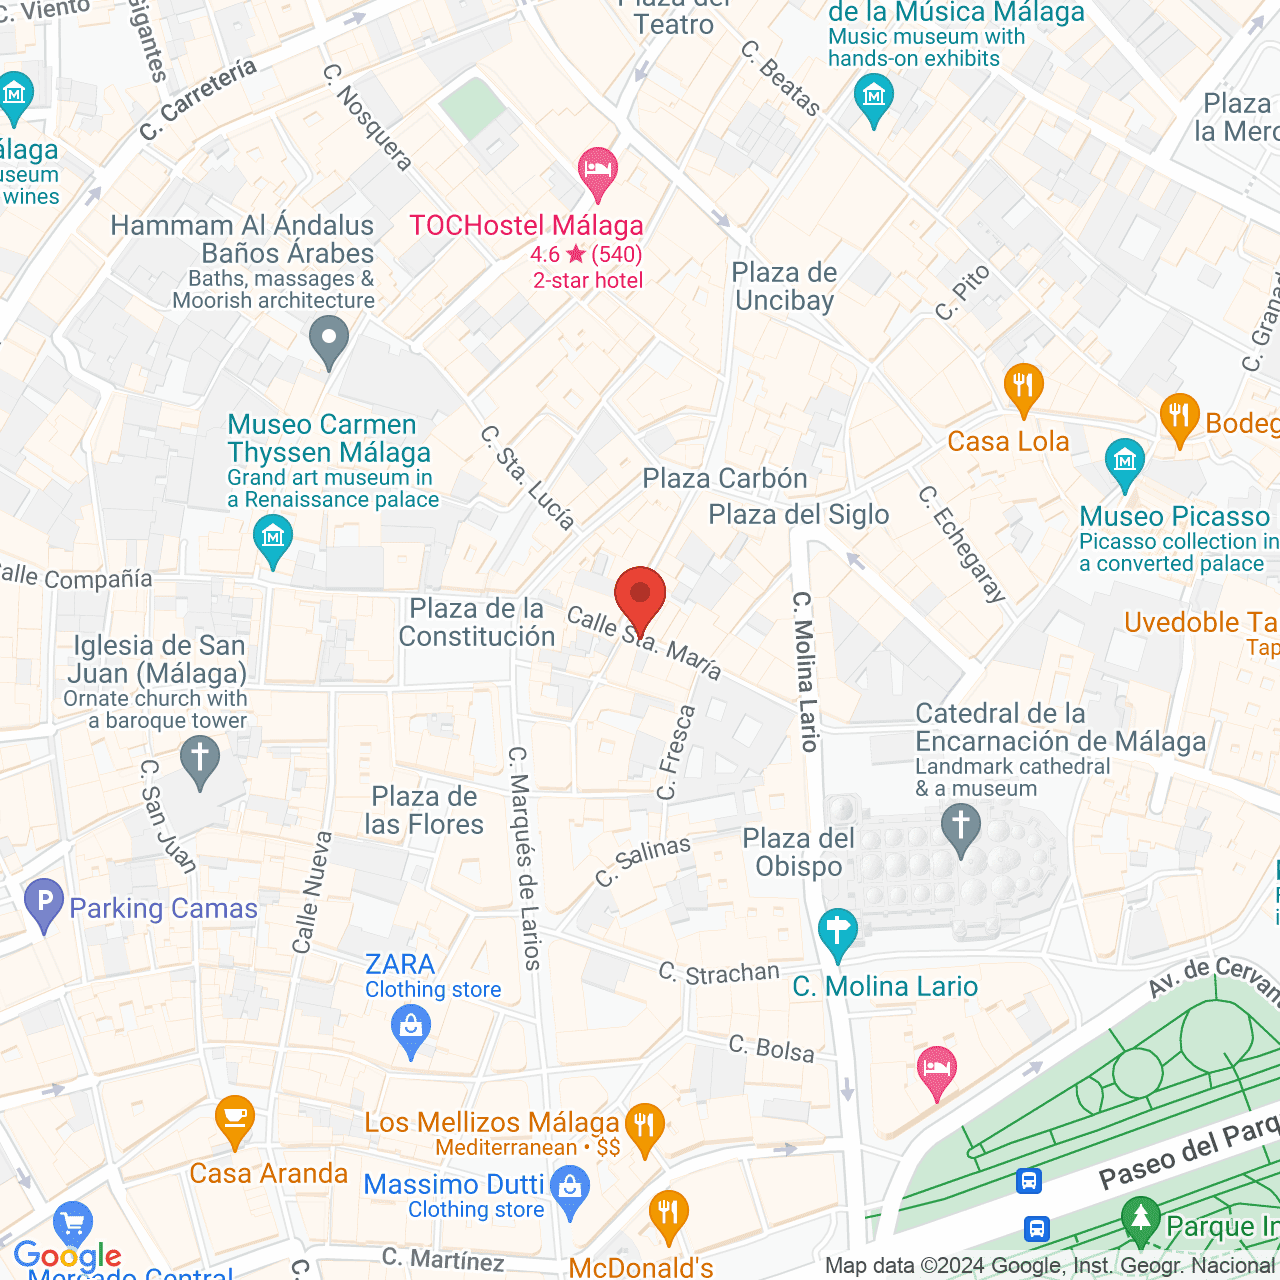 https://maps.googleapis.com/maps/api/staticmap?zoom=10&maptype=hybrid&scale=4&center=36.7211113,-4.4210306&markers=color:red%7C%7C36.7211113,-4.4210306&size=1000x1000&key=AIzaSyAQg6Liu52-a7wn17F9B-5c4QmJ9kTO3Mo